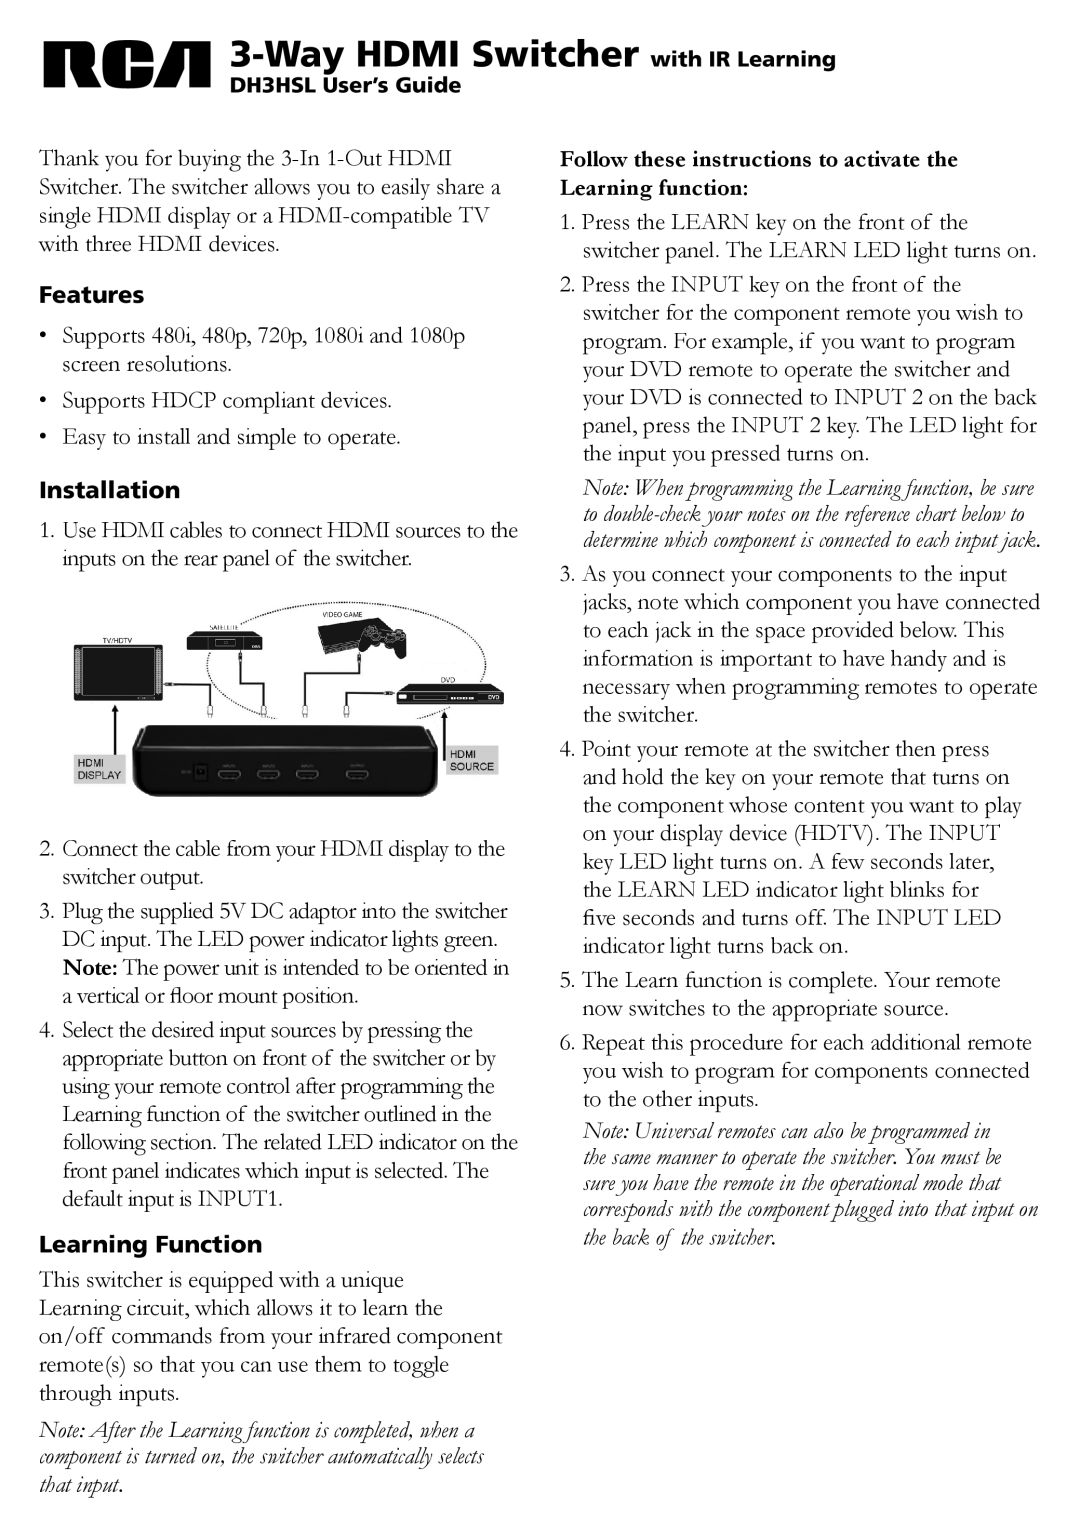 RCA DH3HSL manual Way HDMI Switcher with IR Learning, Features, Installation, Learning Function 